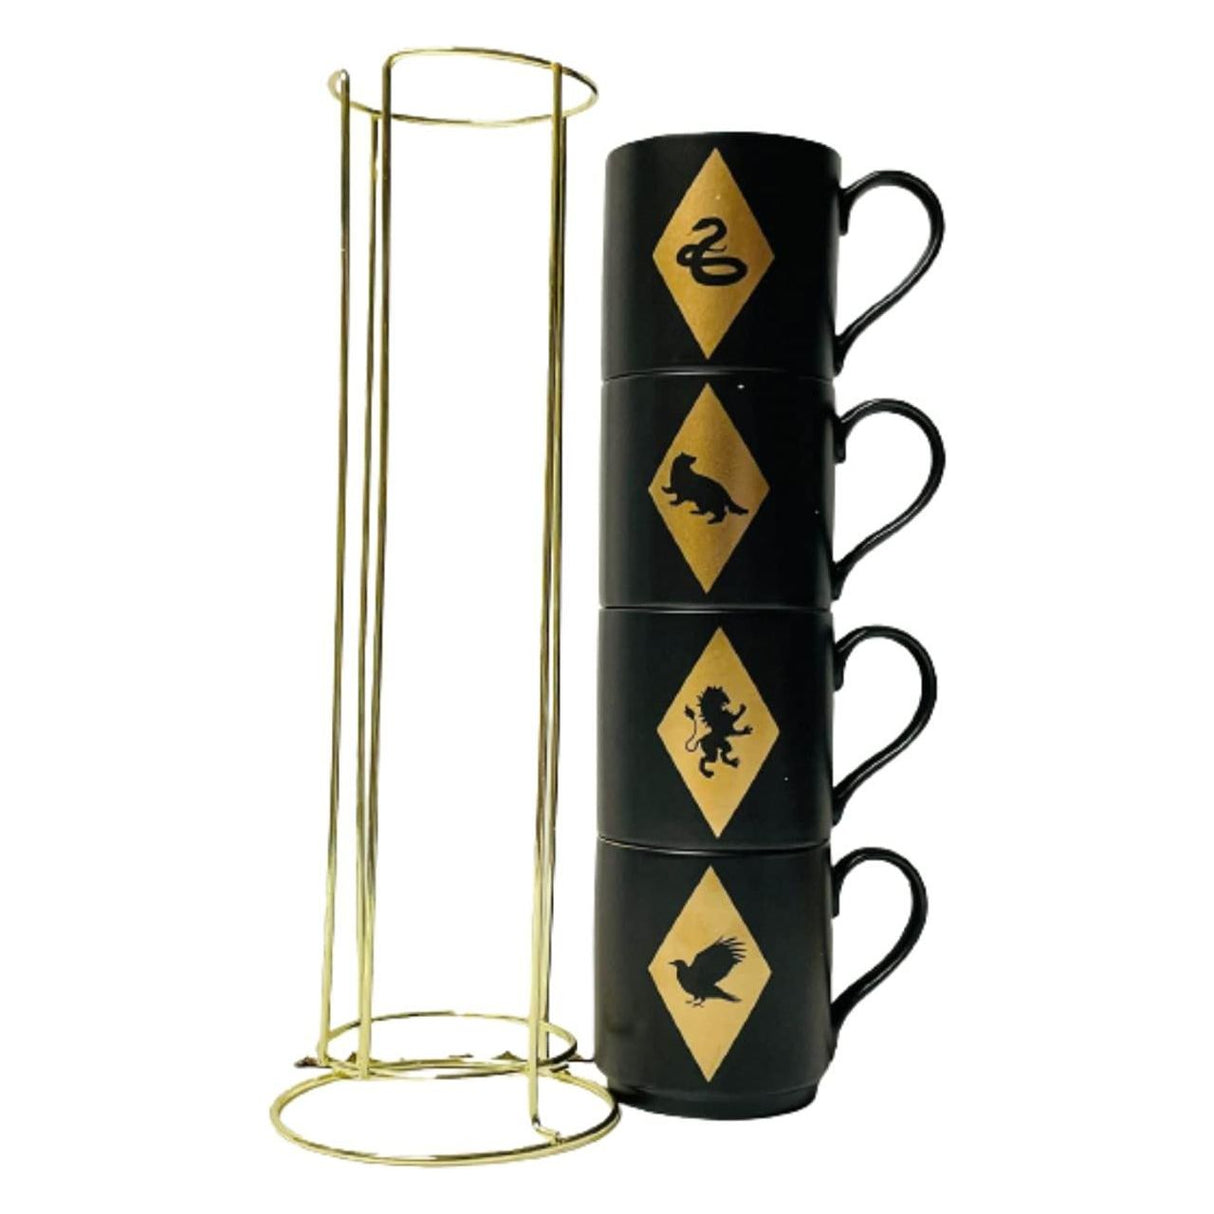 Harry Potter Stacking Mugs Set - Ceramic Coffee Cups